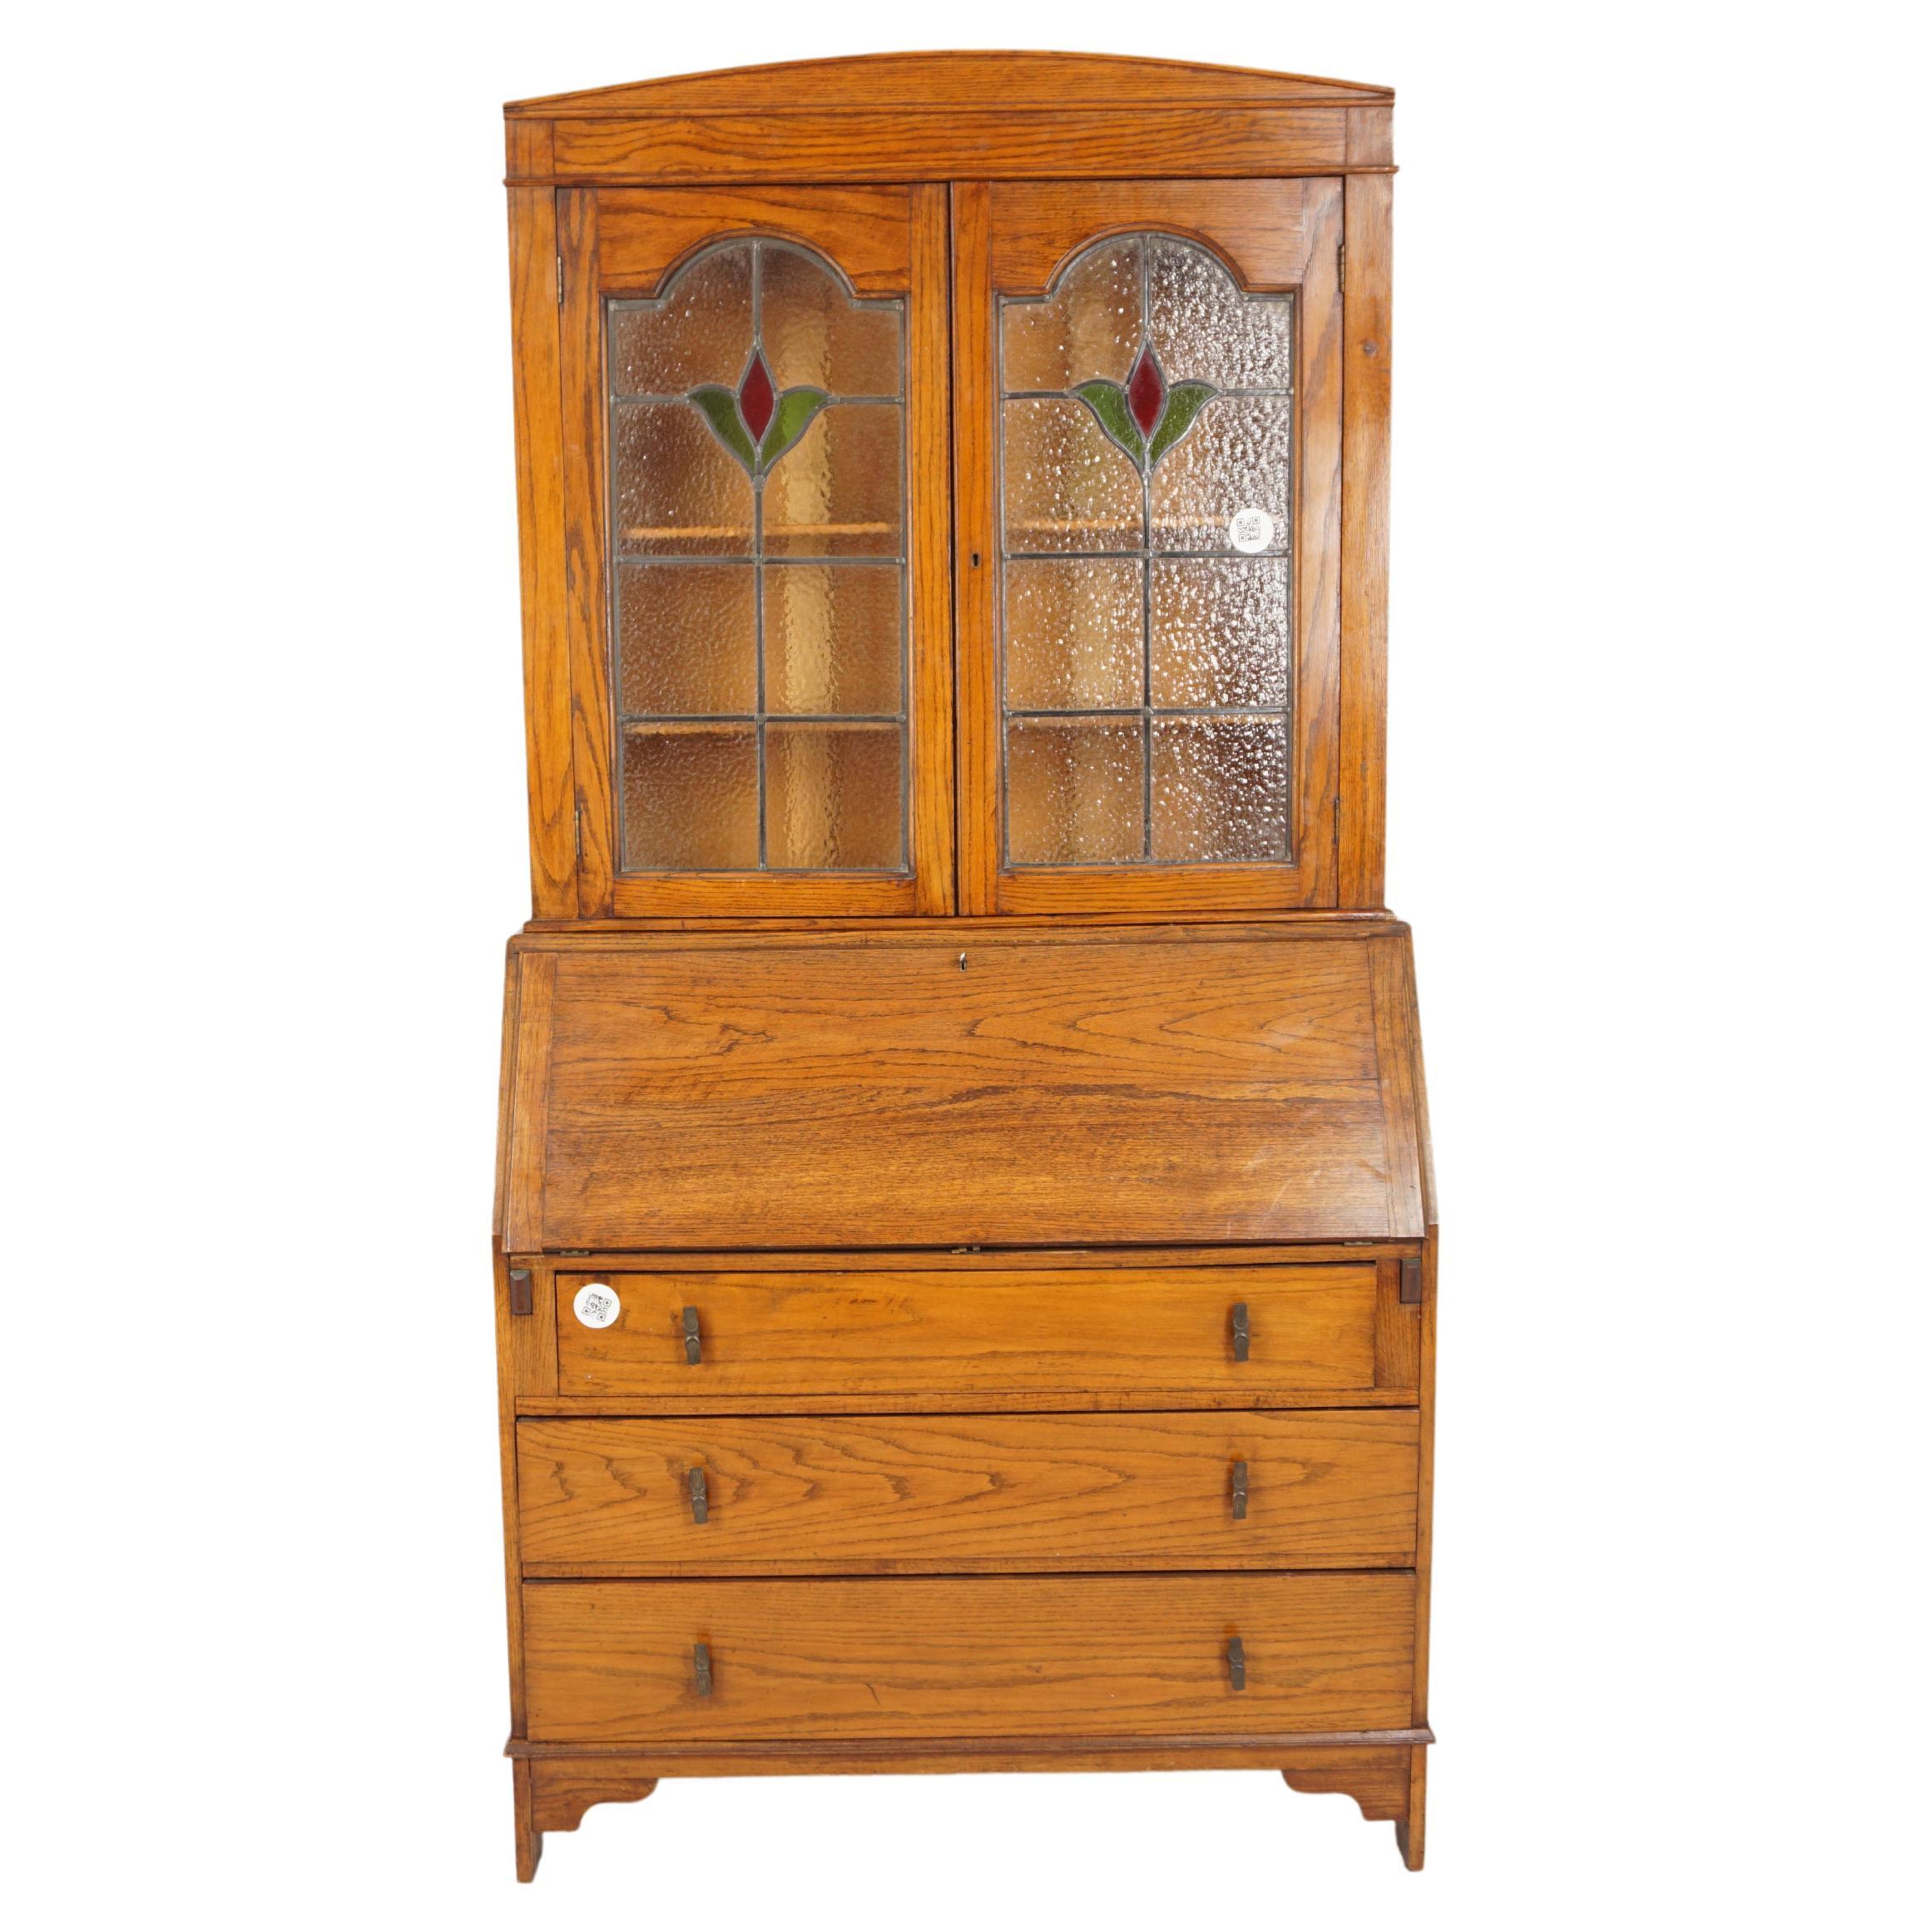 Oak Stained Glass Window Slant Front Desk with Bookcase Top, Scotland 1920, H800